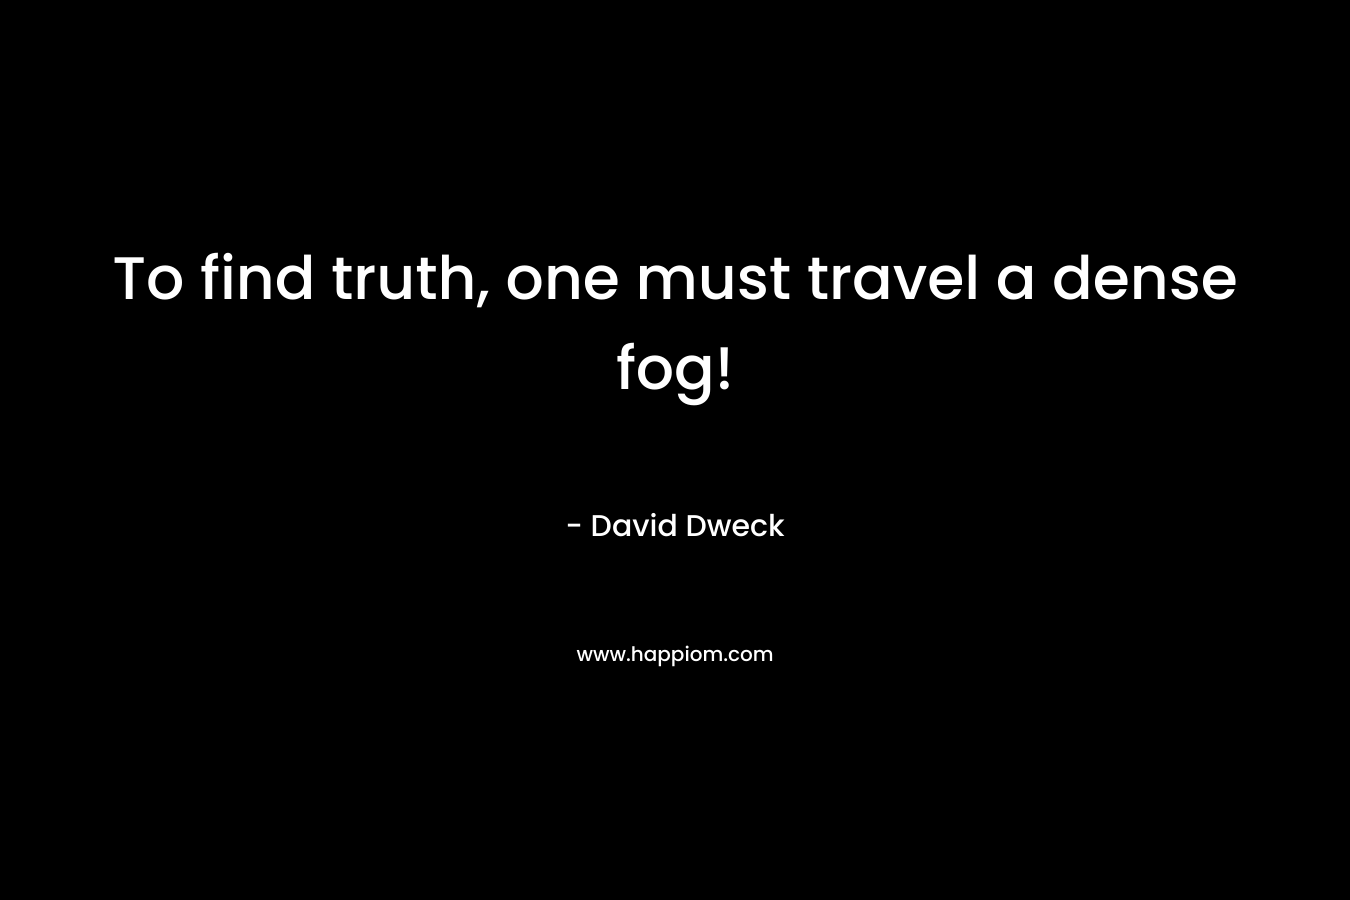 To find truth, one must travel a dense fog!